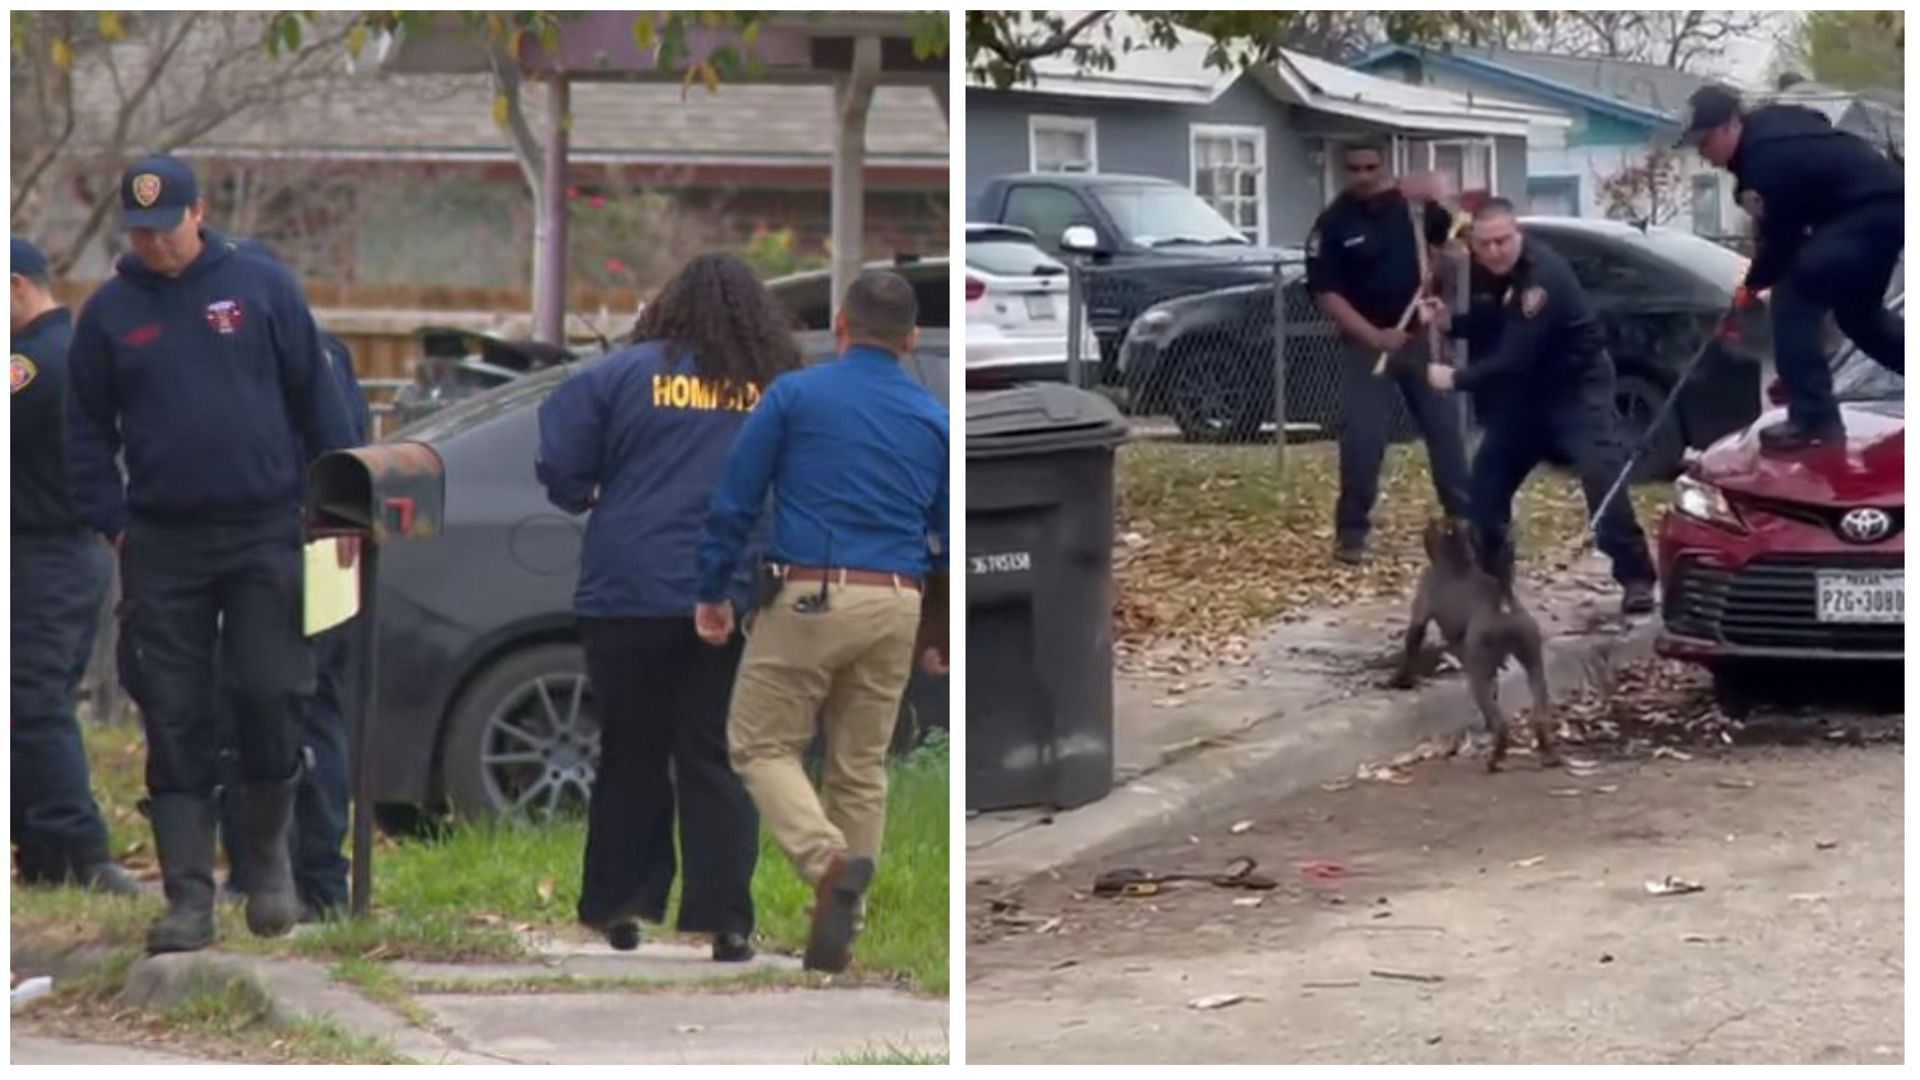 Community mourns the tragic death of an elderly man in a brutal dog attack (Images via Twitter @/RobertPriceTV @/ppv_tahoe) 